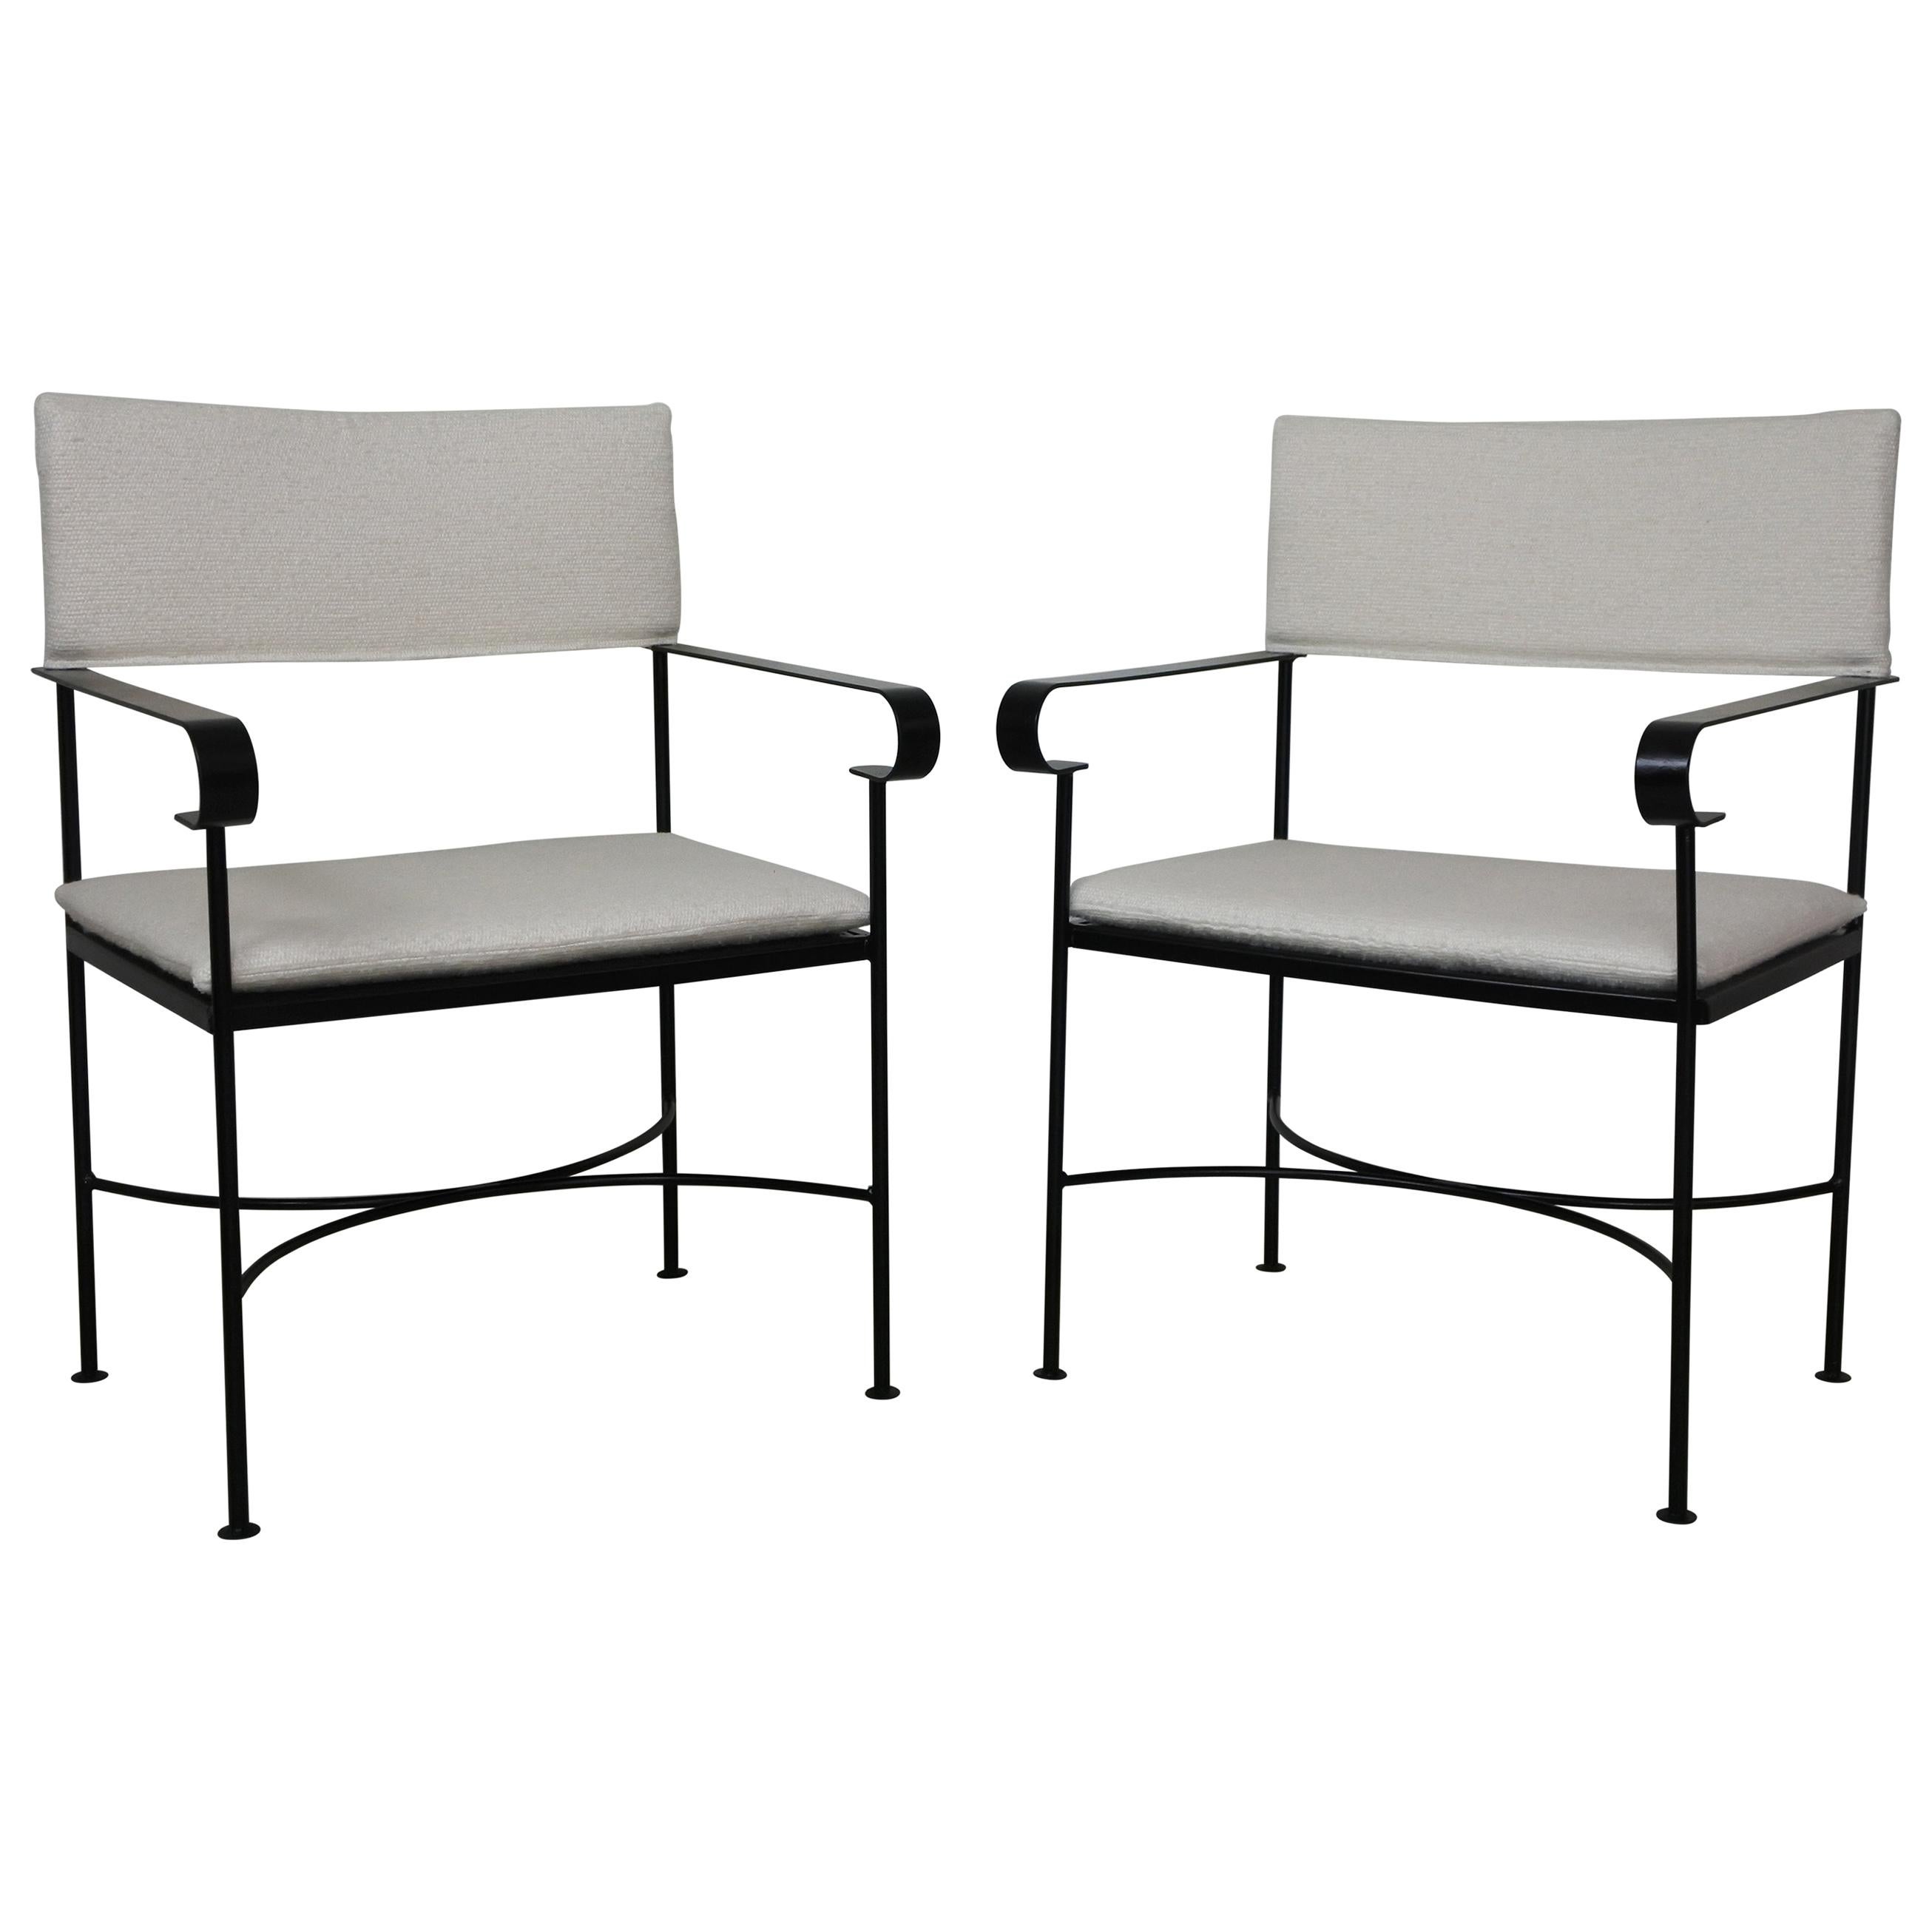 Pair of Neoclassical Armchairs in Black Lacquered Metal, France, 1950s